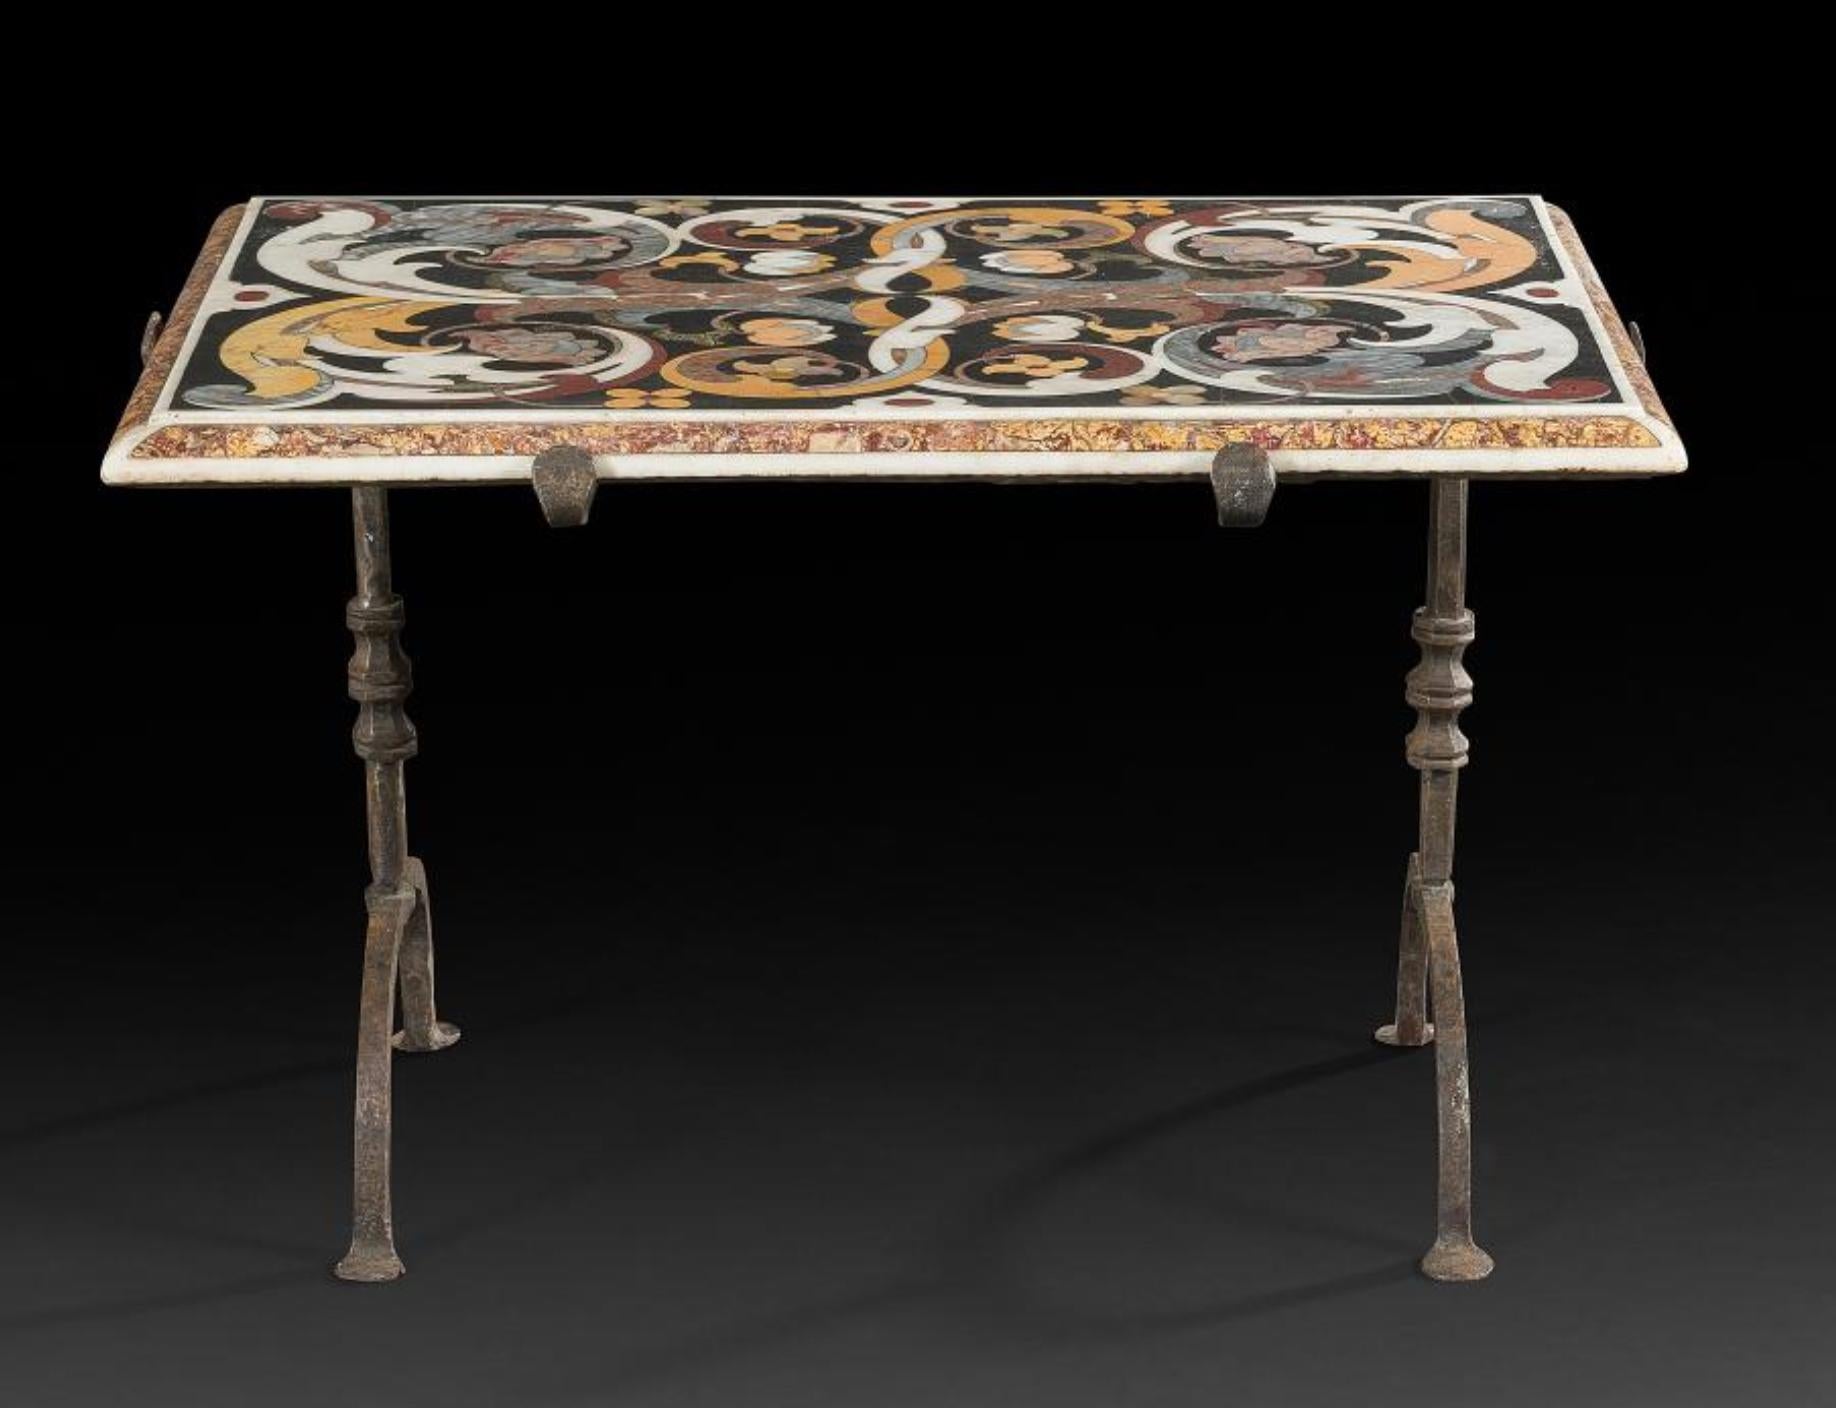 Rare multi-color marble-top inlaid table standing on wrought iron legs.
Made in 17th century in typical Florentine style with a lot of floral motives on black base.